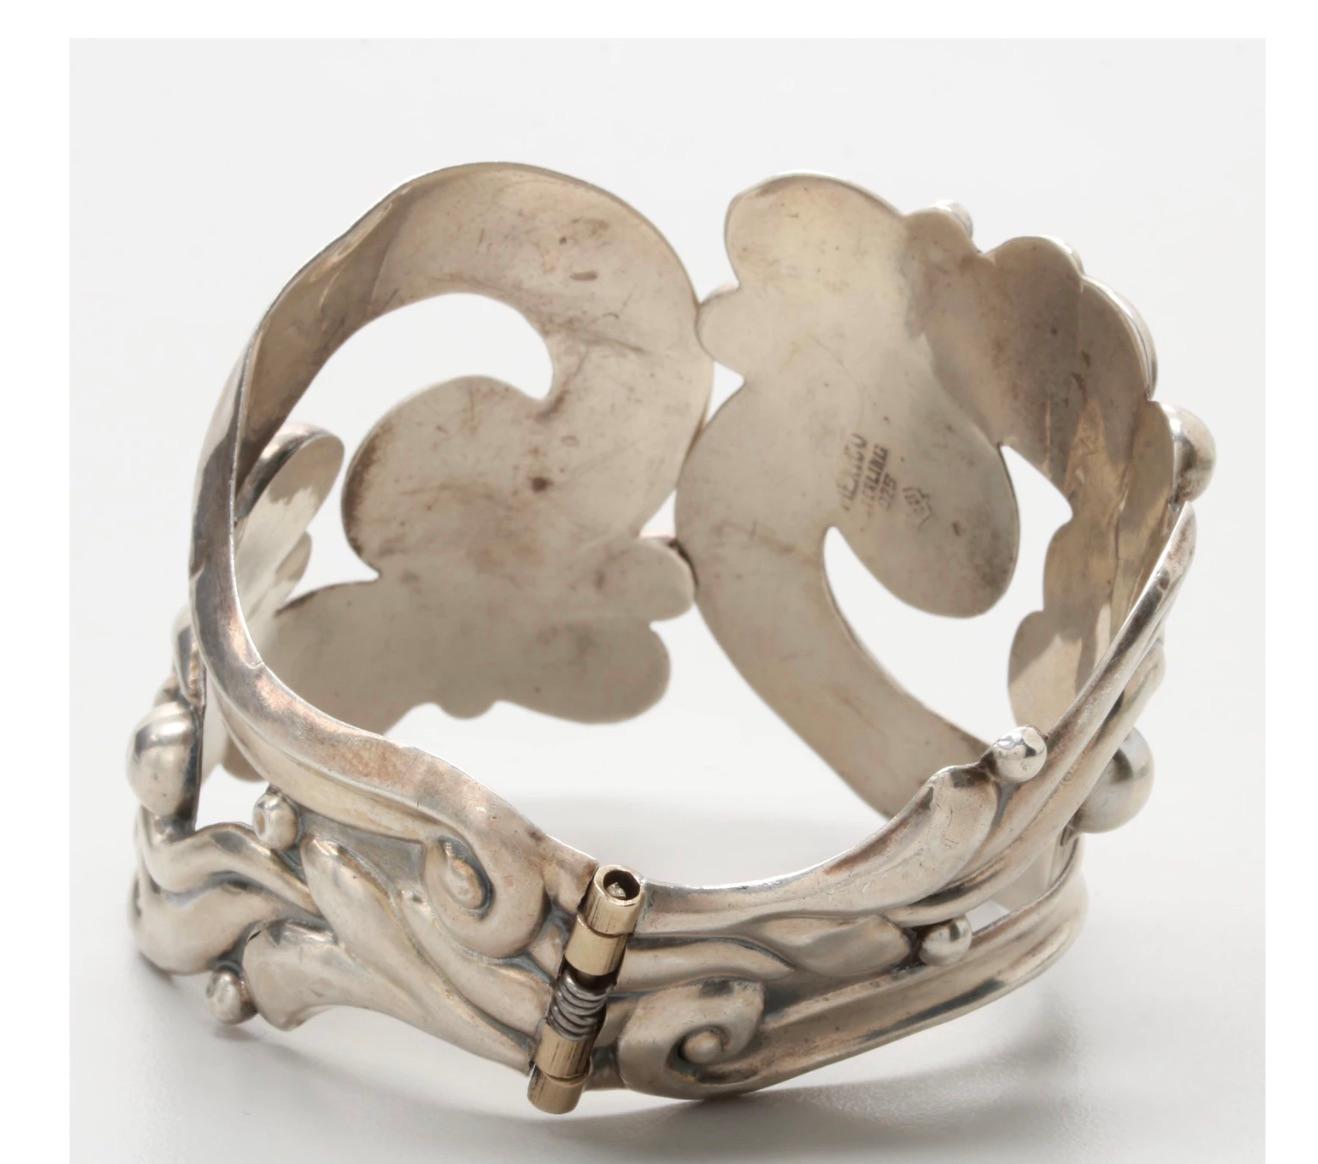 Extraordinary Rare Mexico Sterling 1940s Clamper Bracelet by A. Pineda In Good Condition For Sale In West Palm Beach, FL